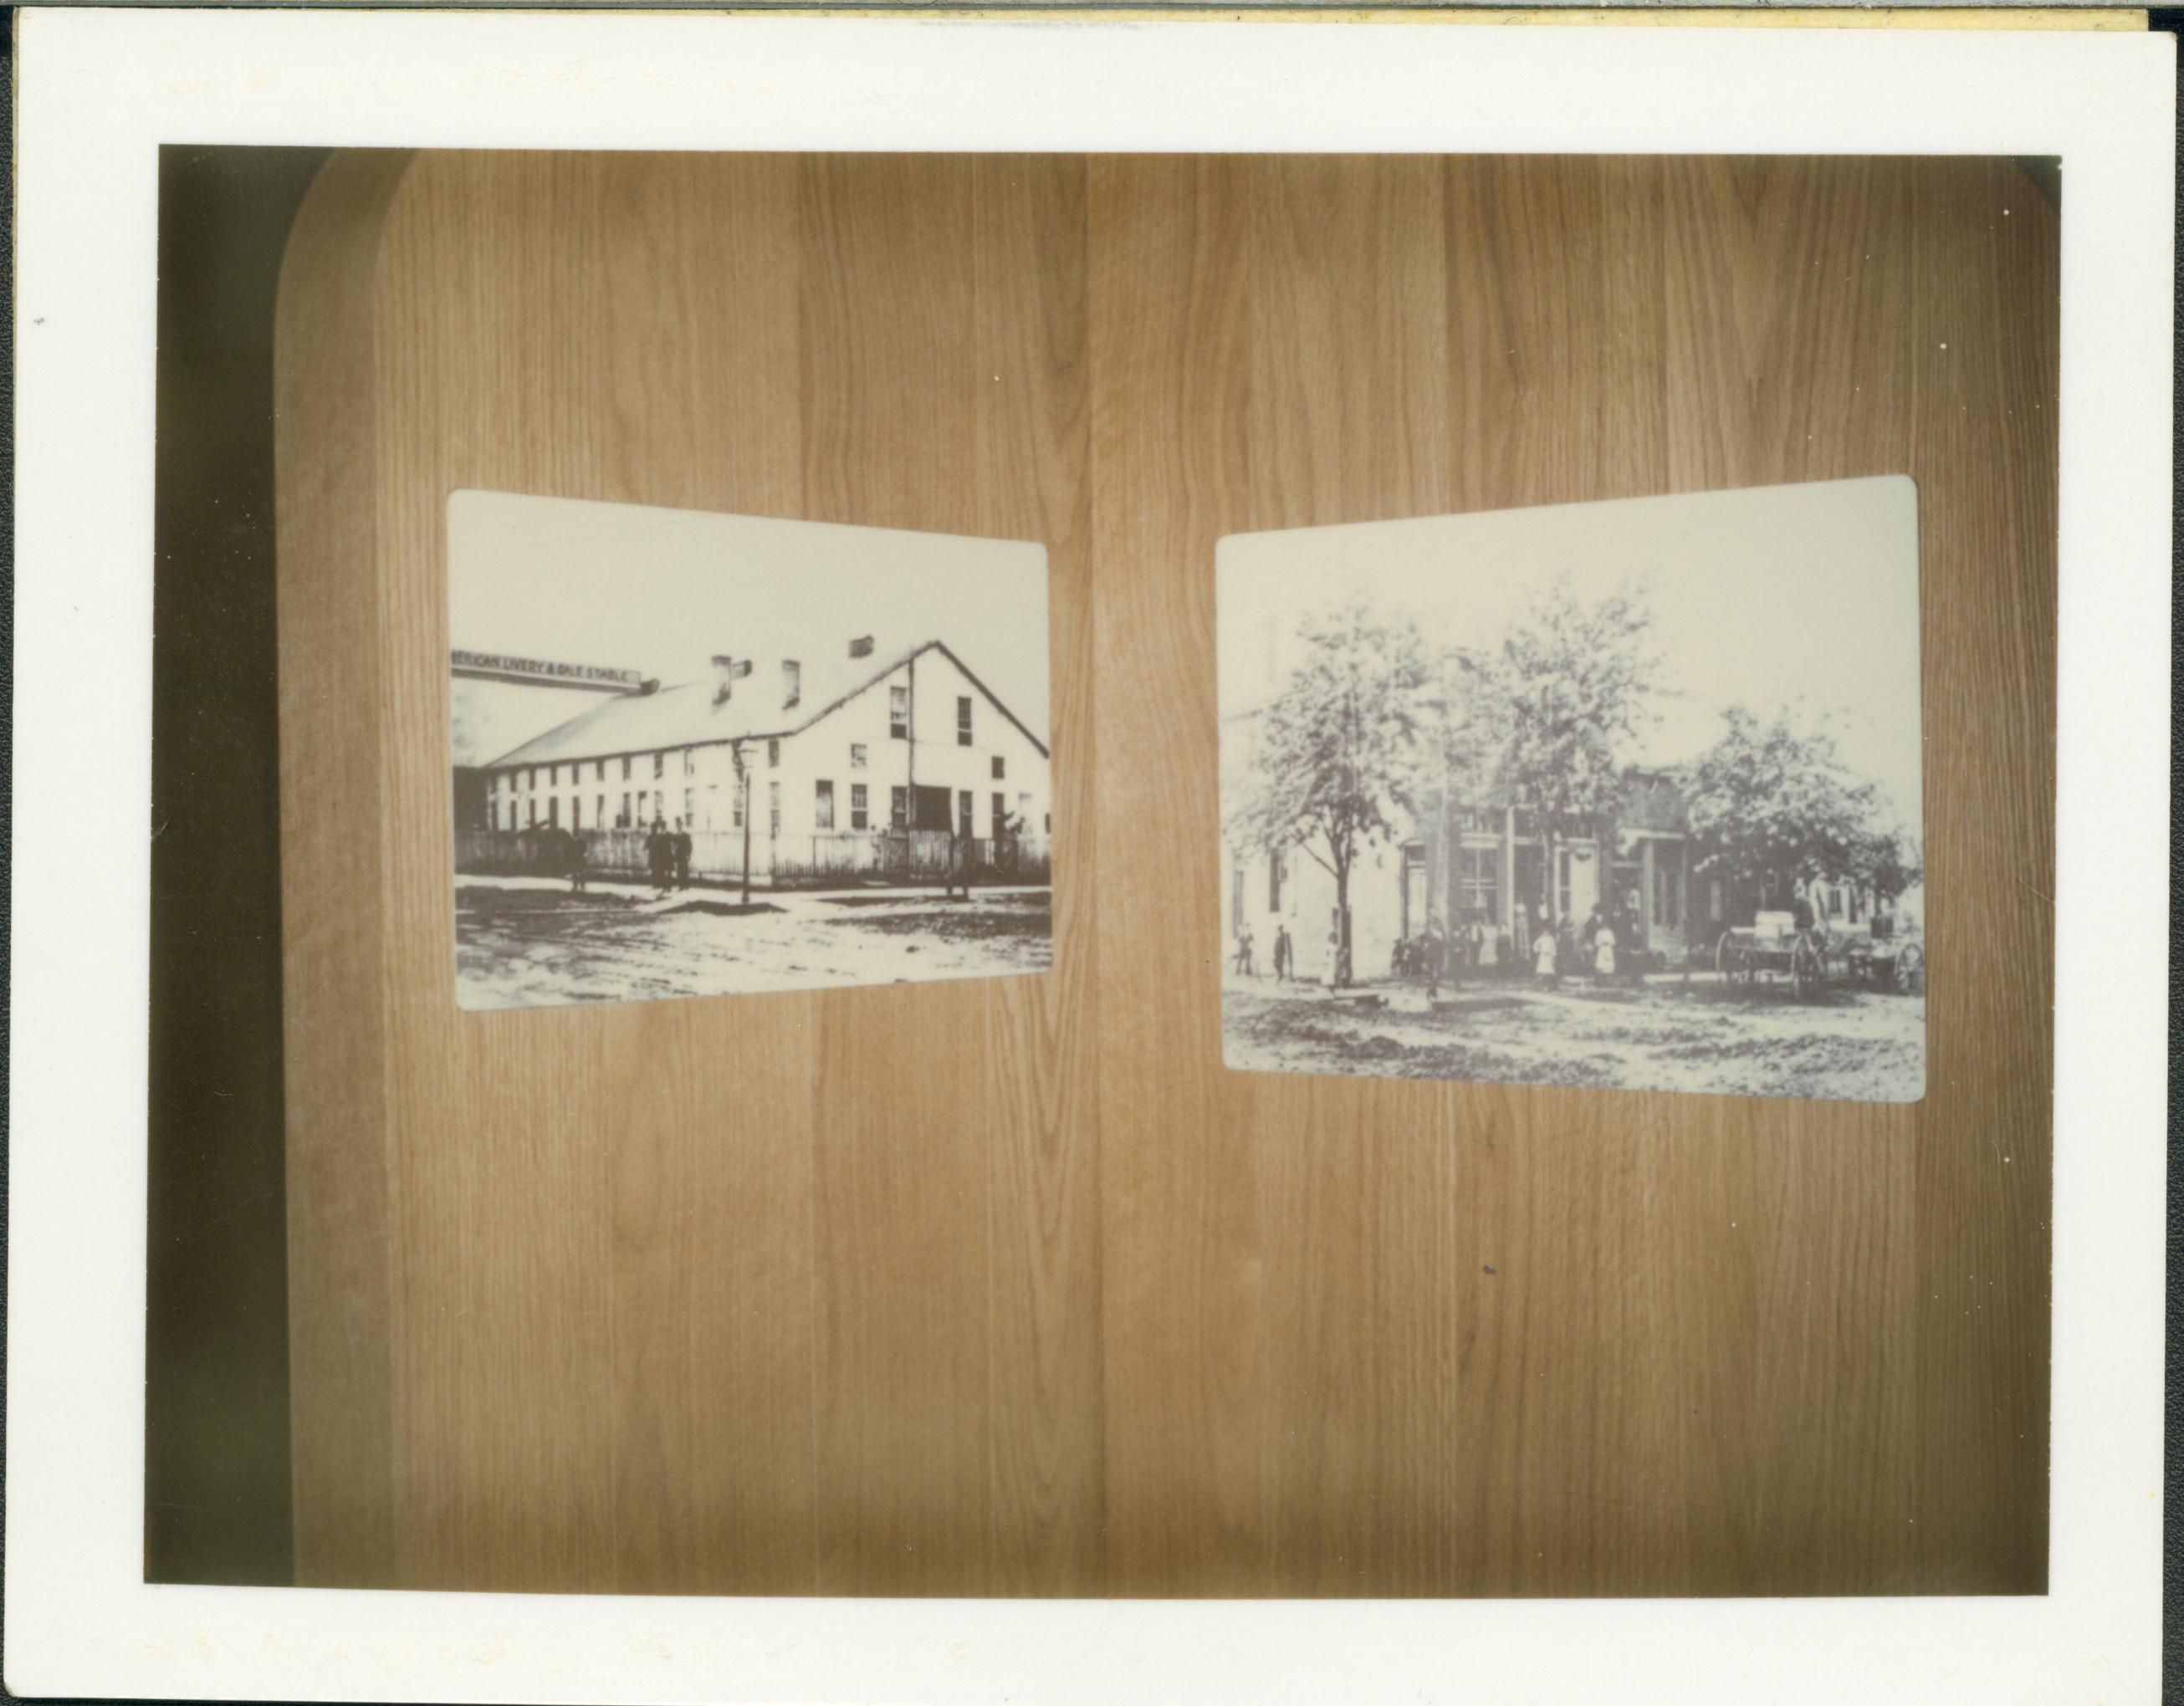 top: old soldiers home, bottom: Prickett House Lincoln Home NHS, class 13, pic 3, 19, exhibit #2 display, train depot